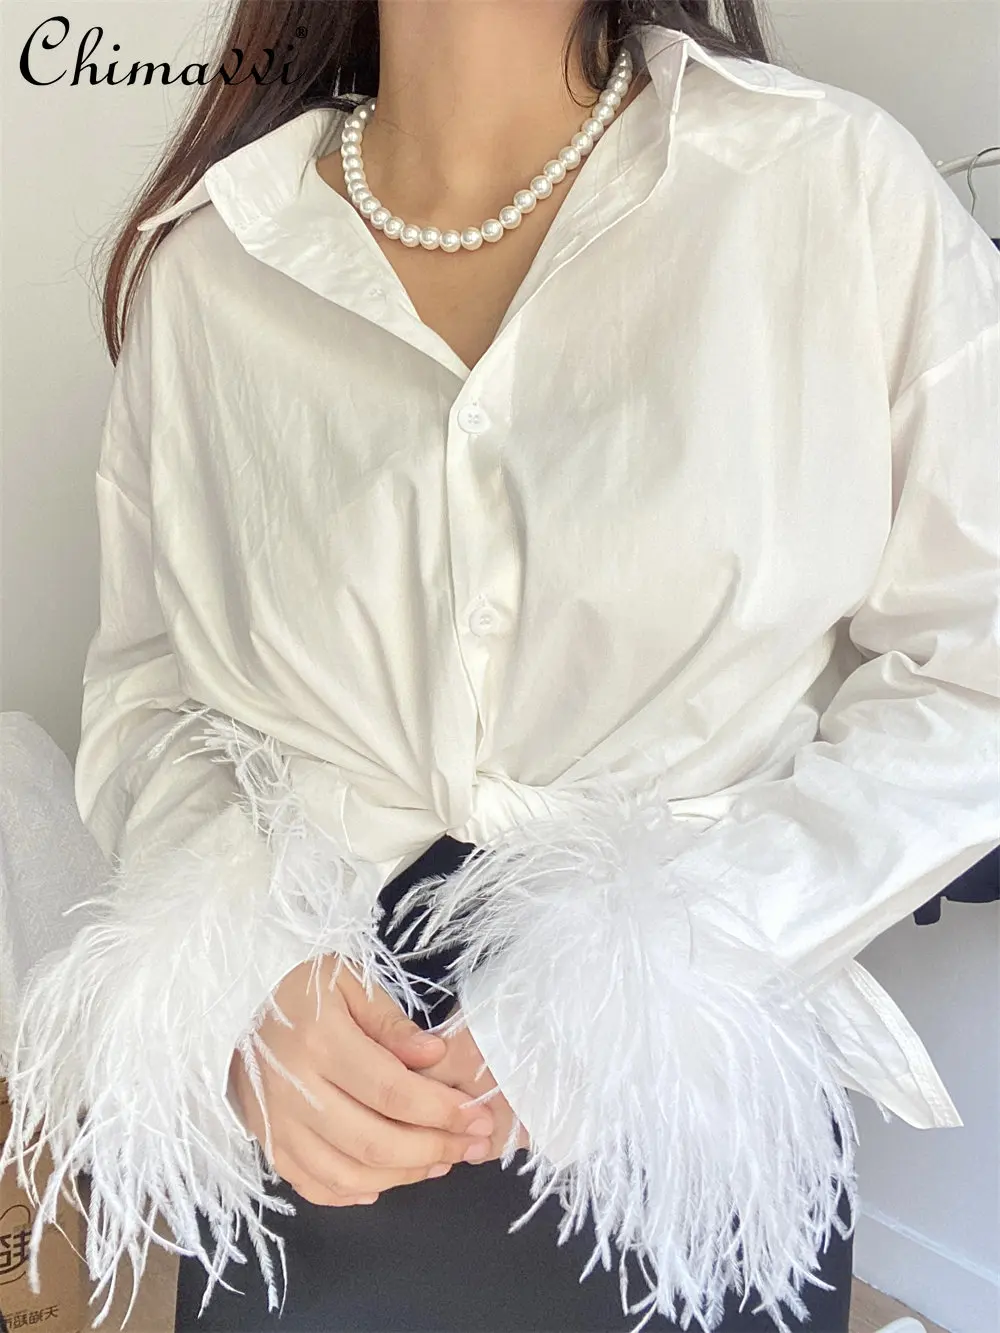 2022 Early Autumn New Ladies Fashion Ostrich Feather Lazy Style Blouses Top Women's Elegant Simple Loose Solid Long Sleeve Shirt